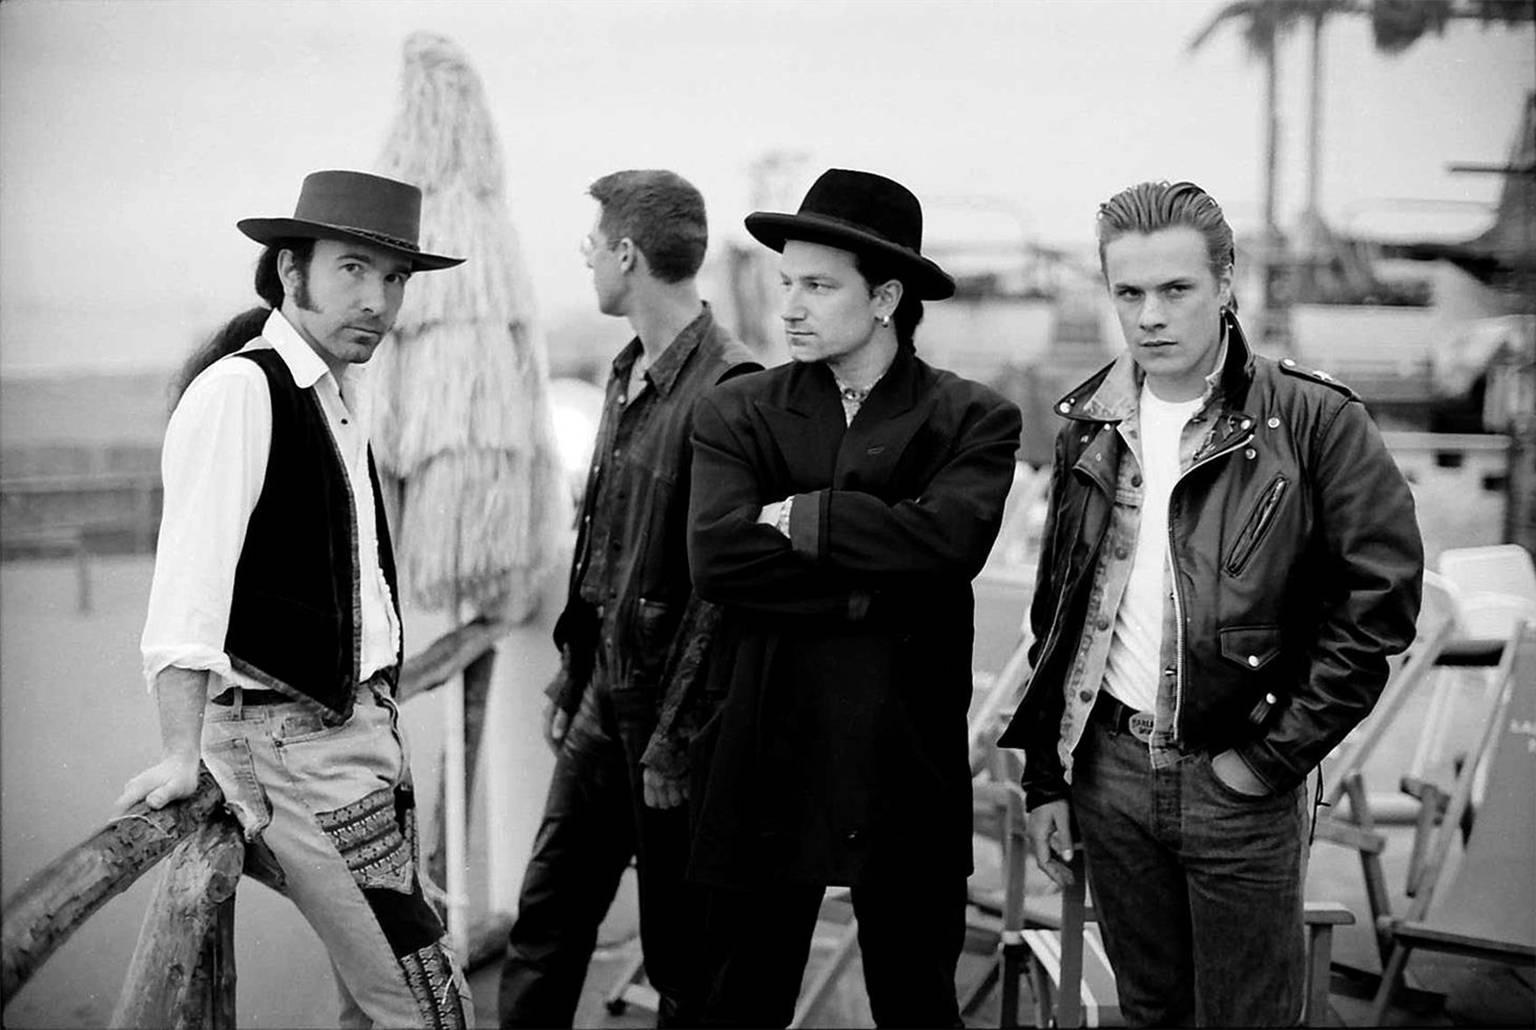 Colm Henry Black and White Photograph – U2, 1988